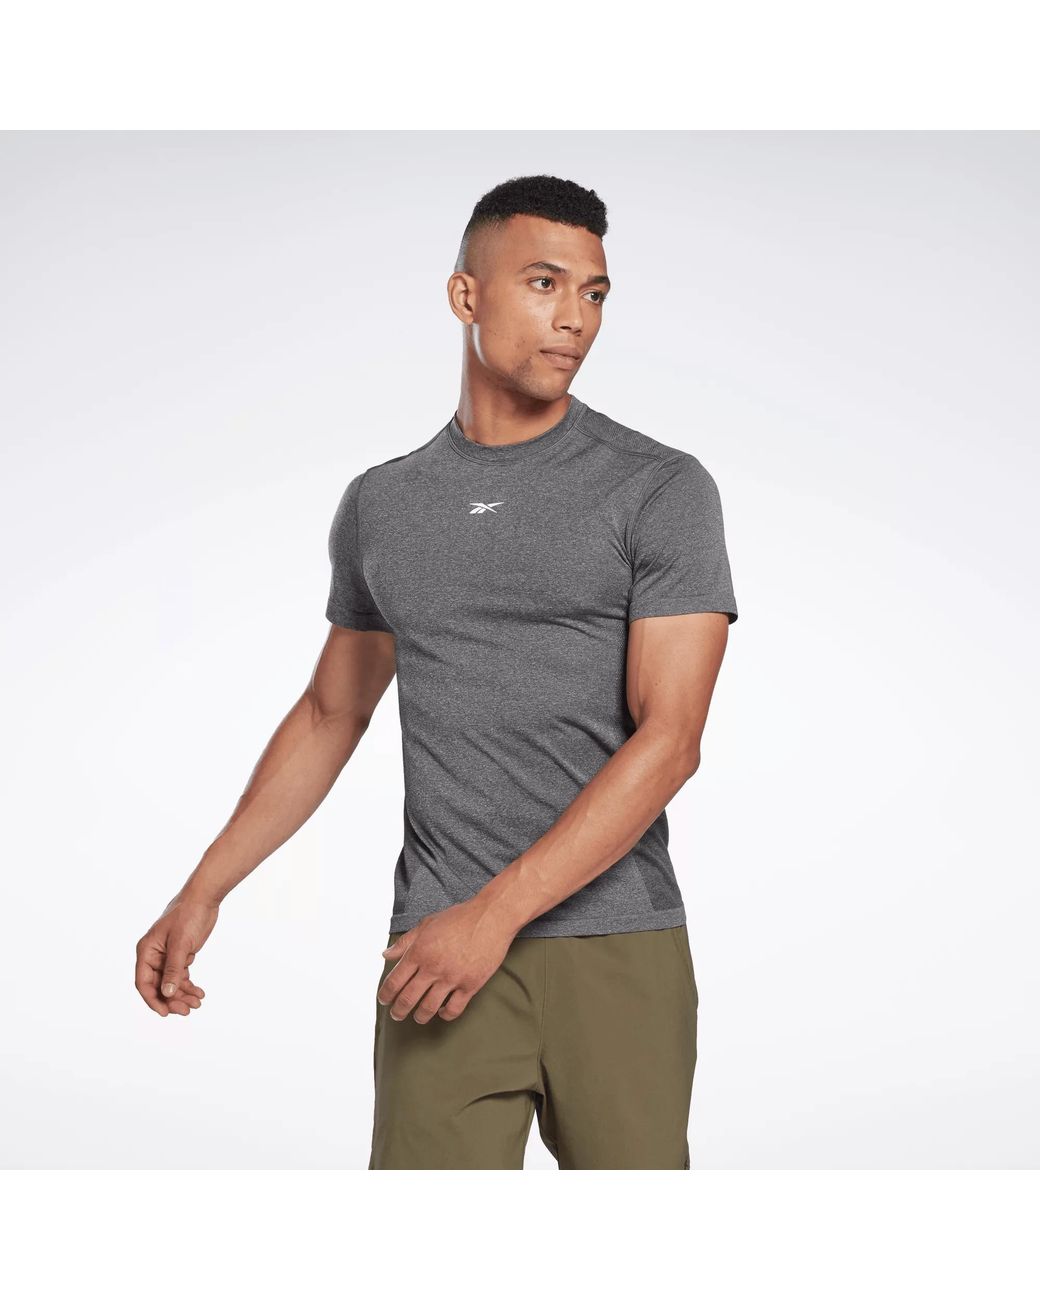 Reebok United By Fitness Myoknit Seamless T-shirt in Gray for Men